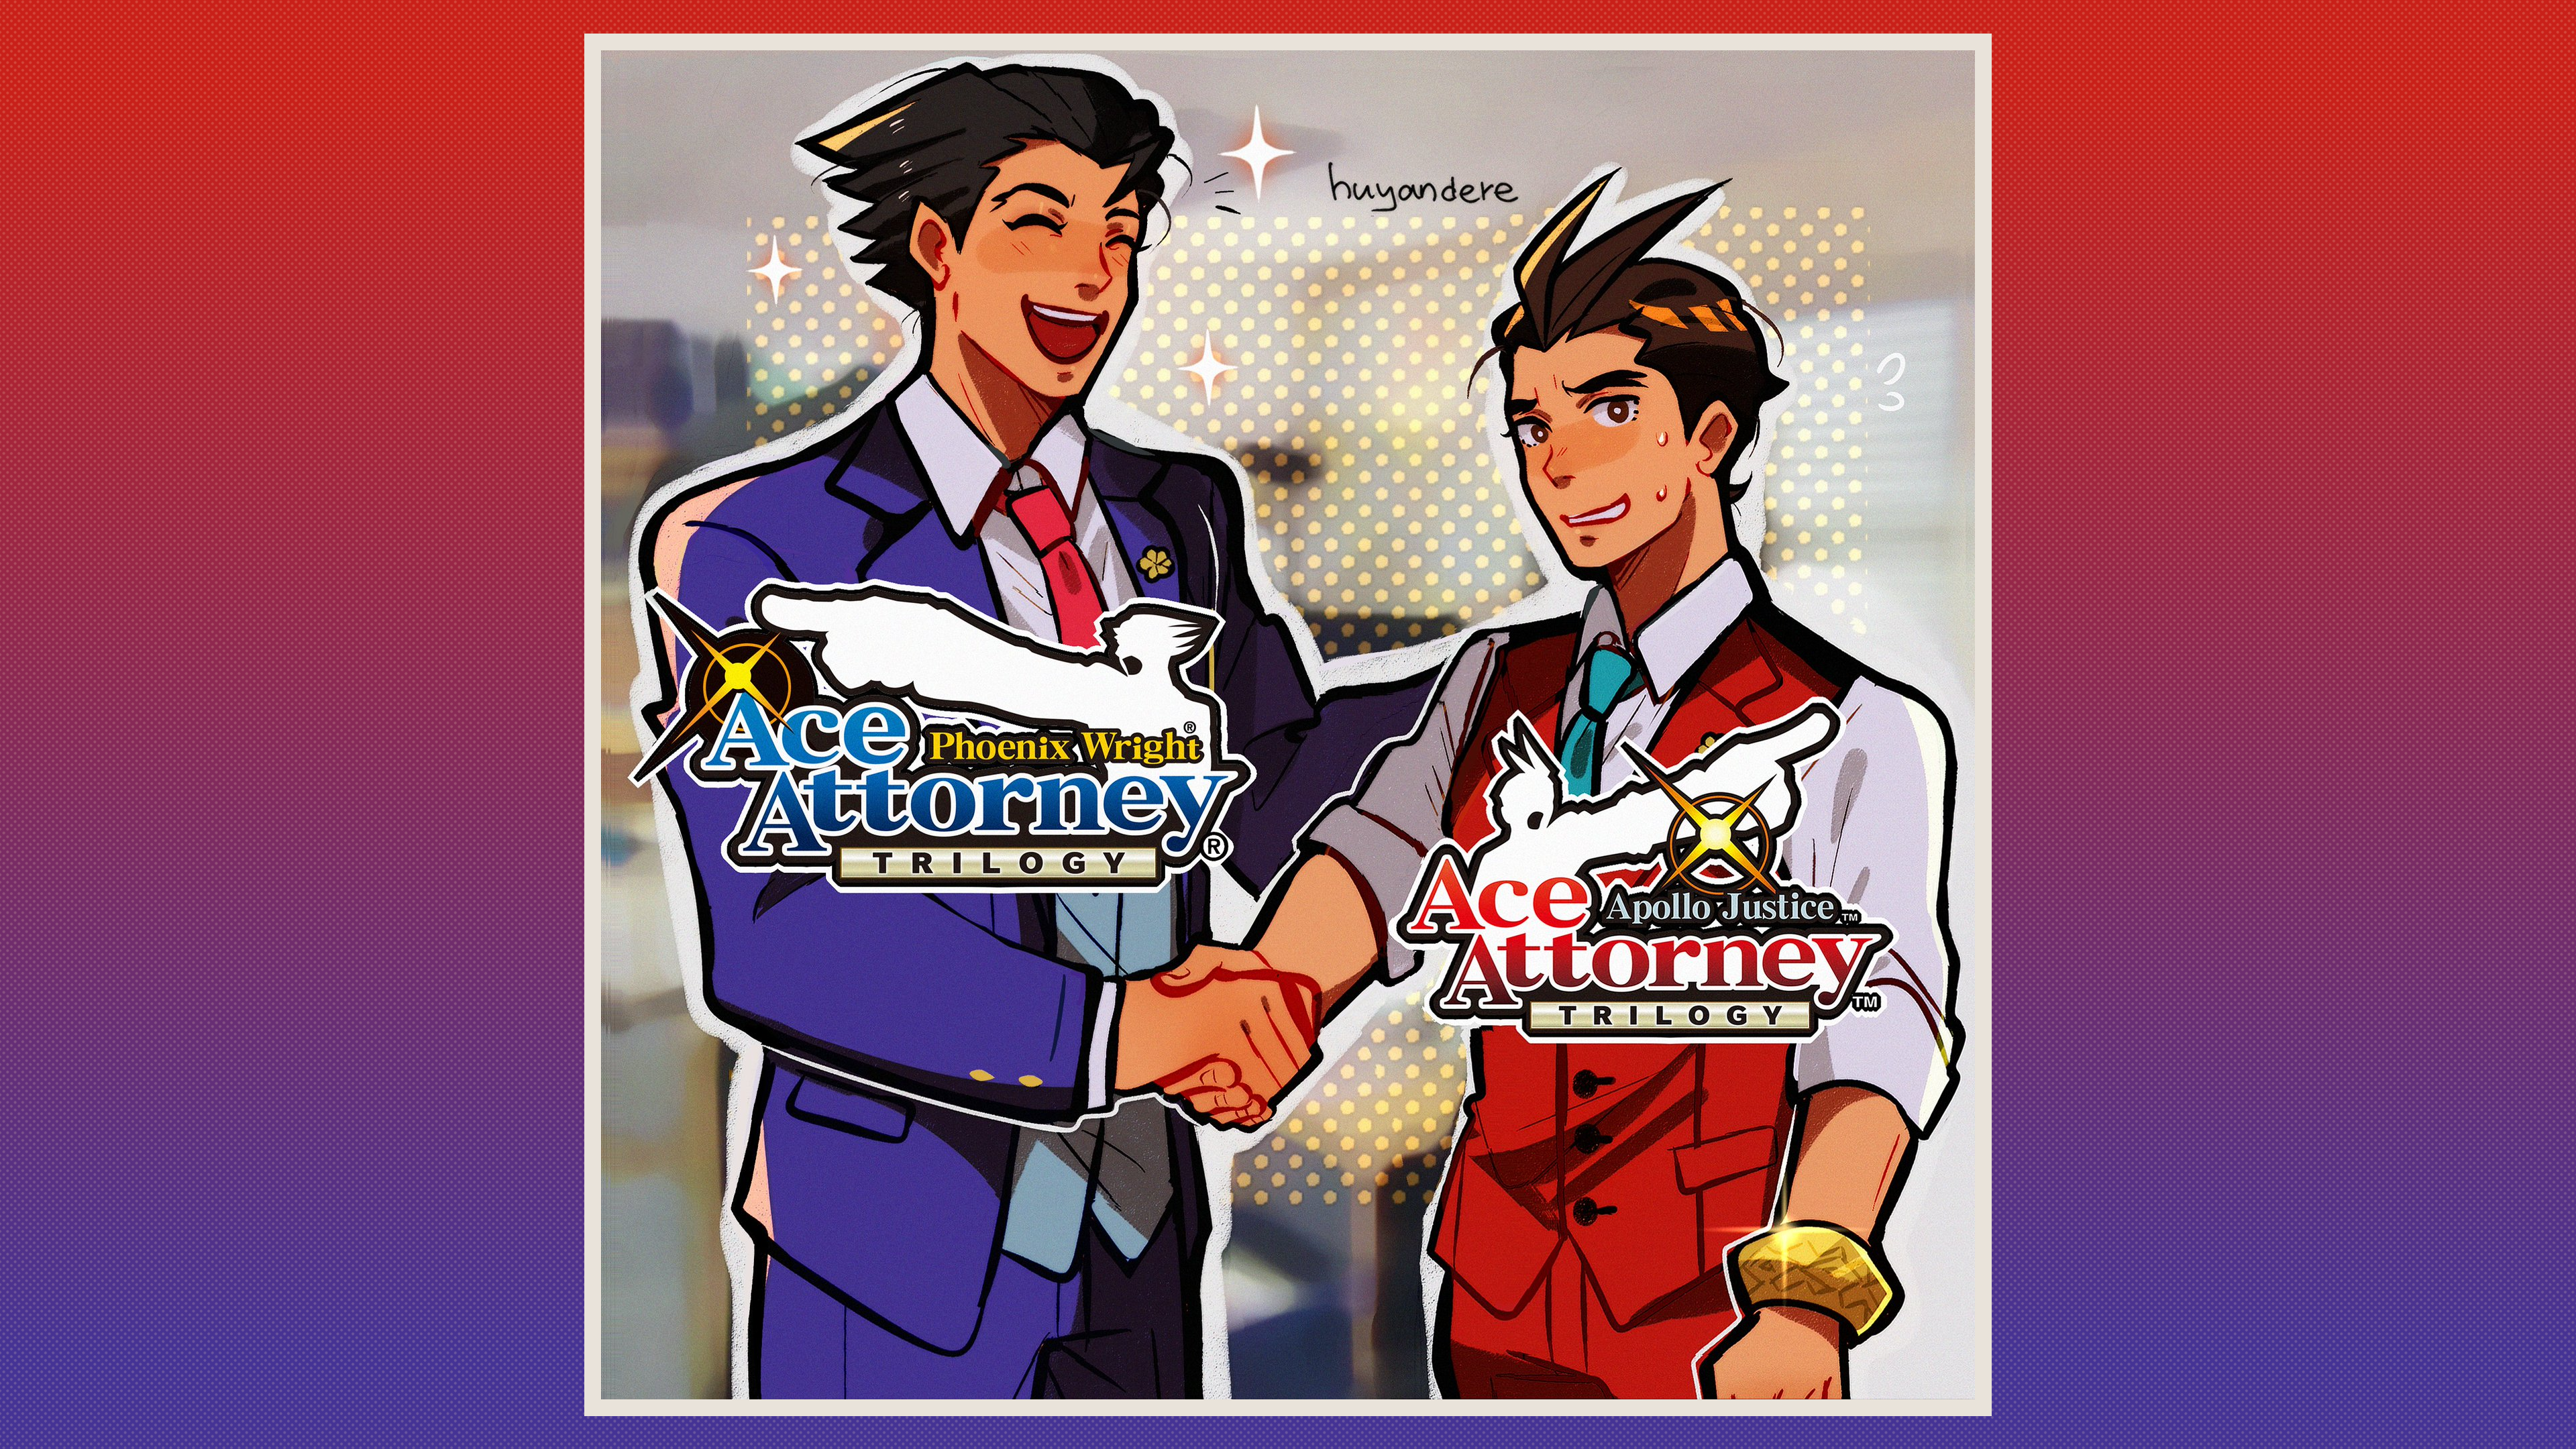 Anime 3840x2160 video games Spiky Hair ace attorney phoenix wright Apollo Justice Trilogy Capcom suits red tie blue tie vest white shirt shirt memes The Office Lapel Pin embarrassed smiling open mouth red pants blue pants simple background gradient minimalism signature